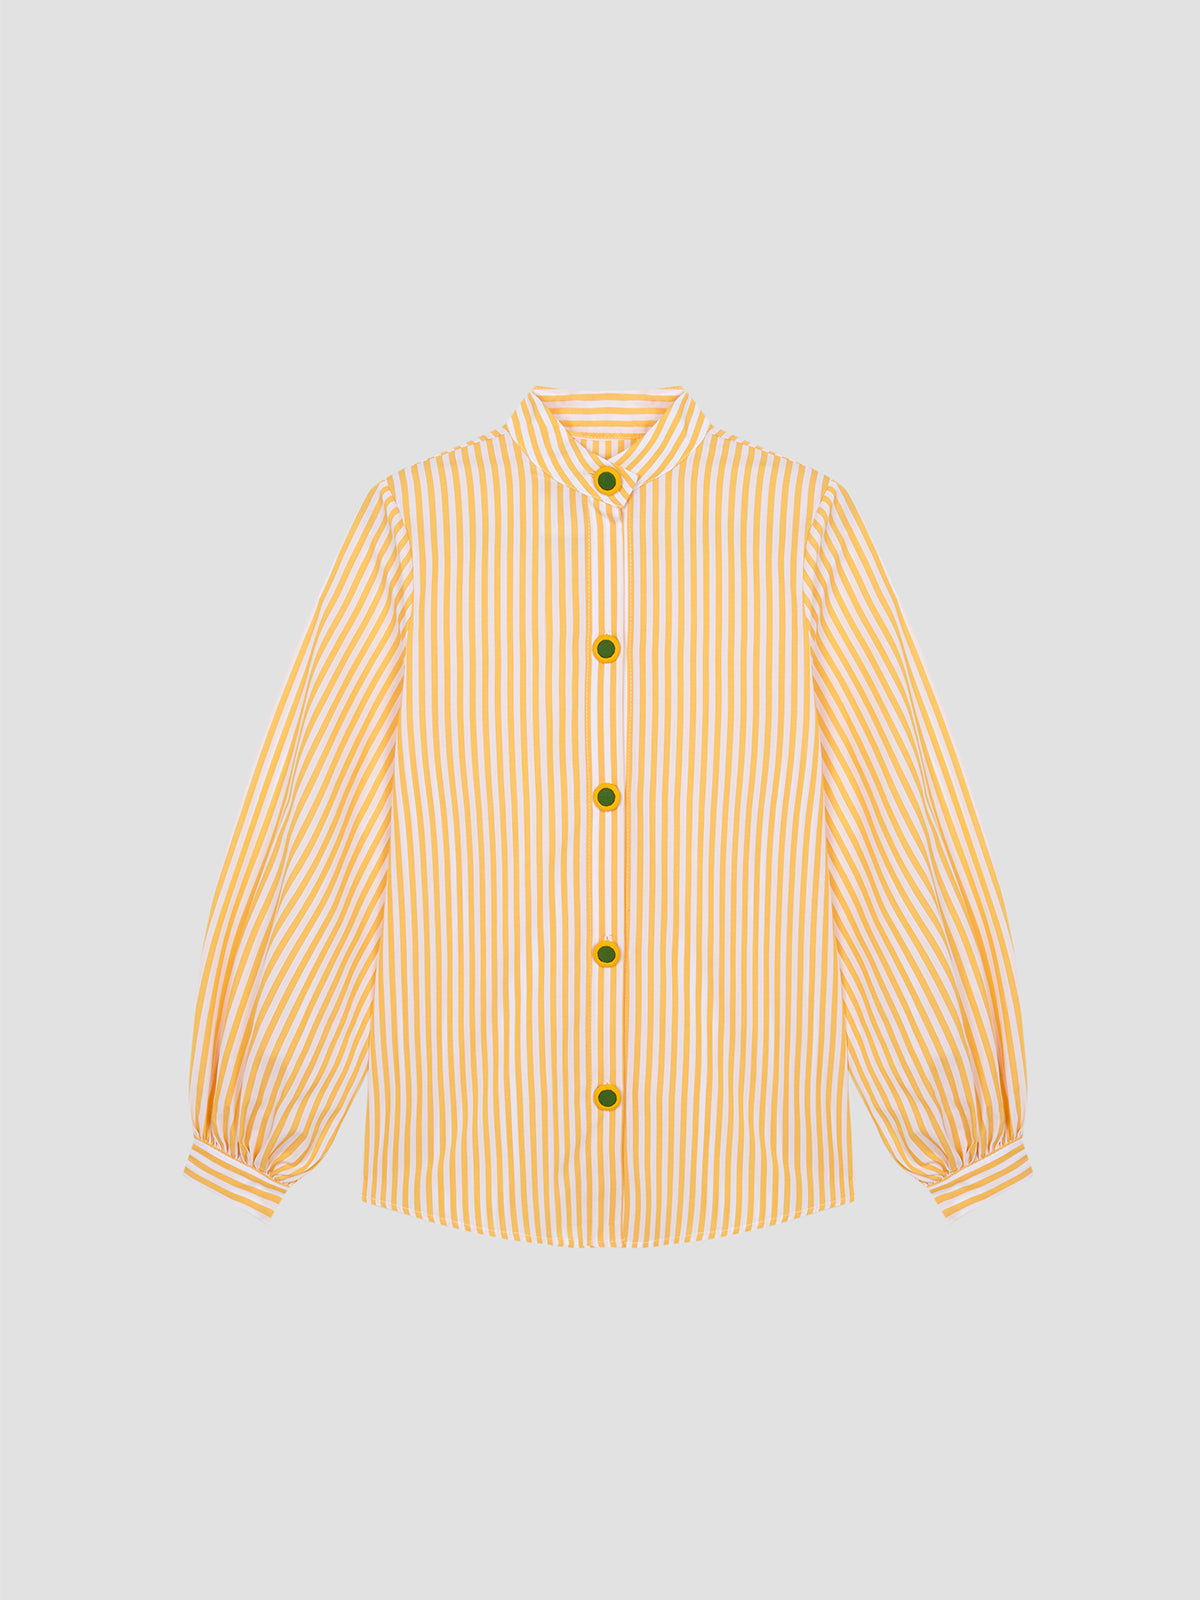 Mikado Shirt Yellow is a yellow and white striped long sleeve shirt with yellow and lime green button closure.